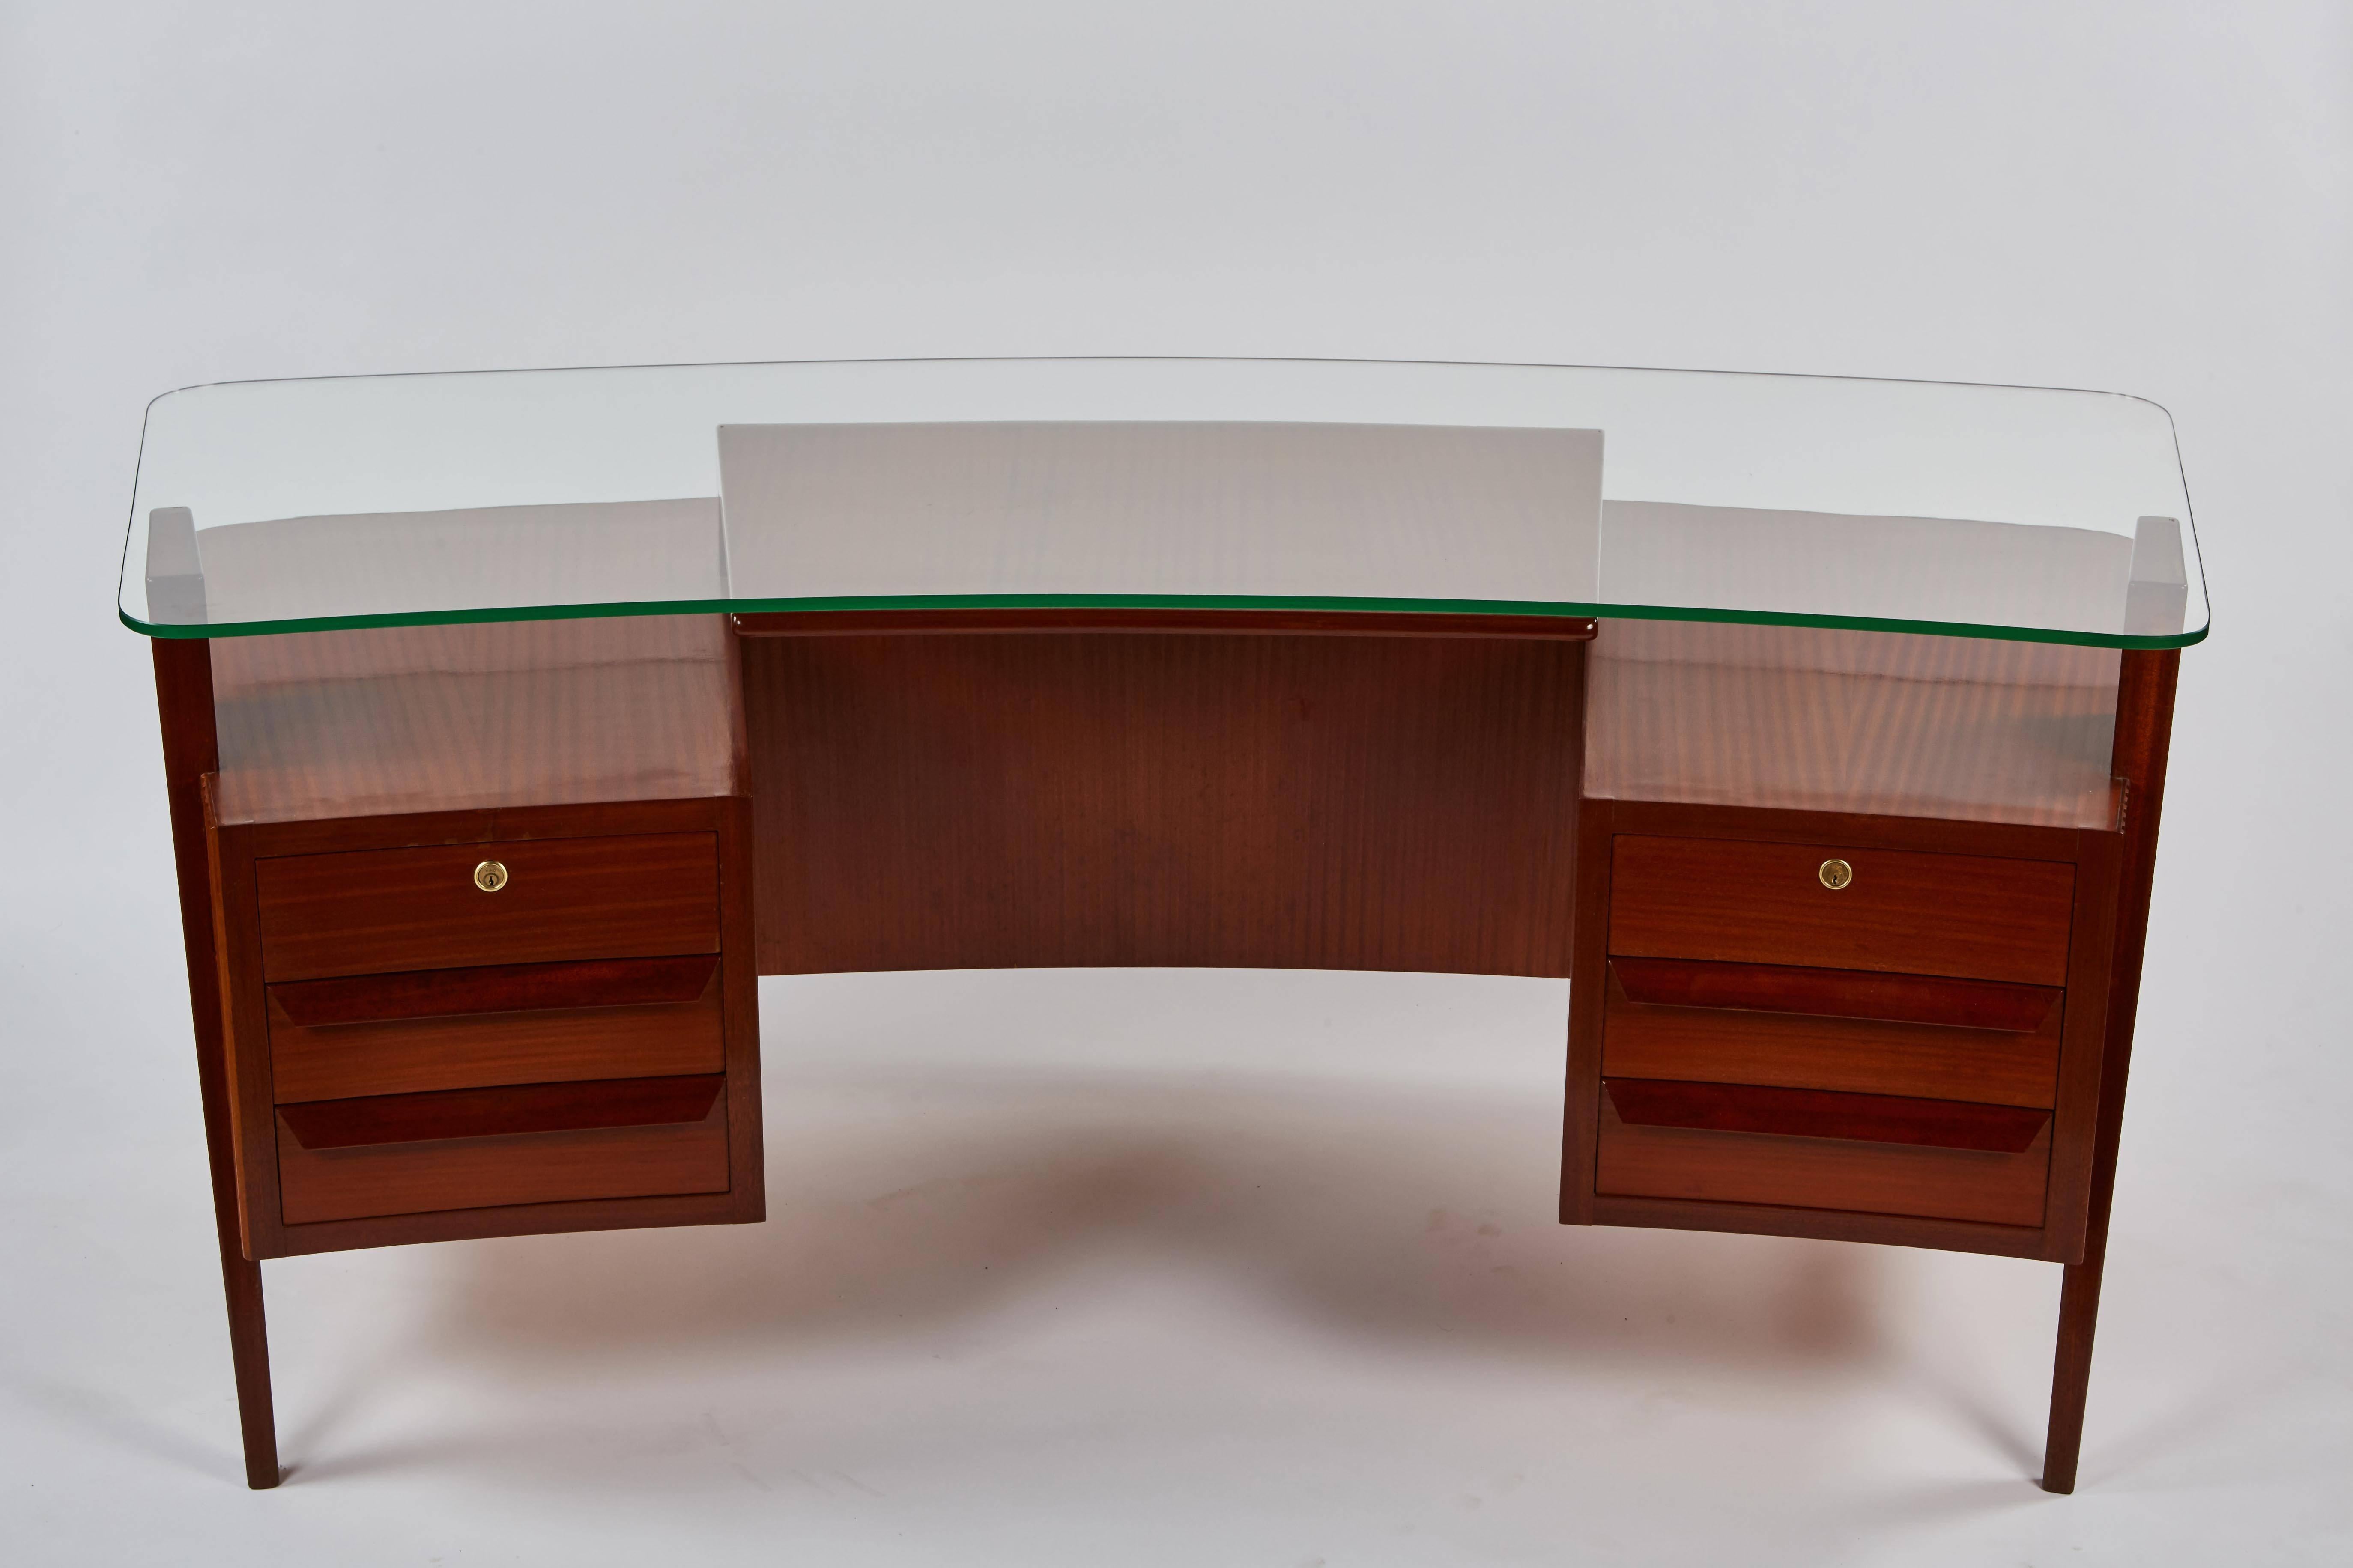 A highly striking, rare and dramatic Carlo de Carli Desk. This curvilinear executive desk is in ribbon mahogany with a glass top. The apron features vertical ridged detailing and four drawers, two of which lock.